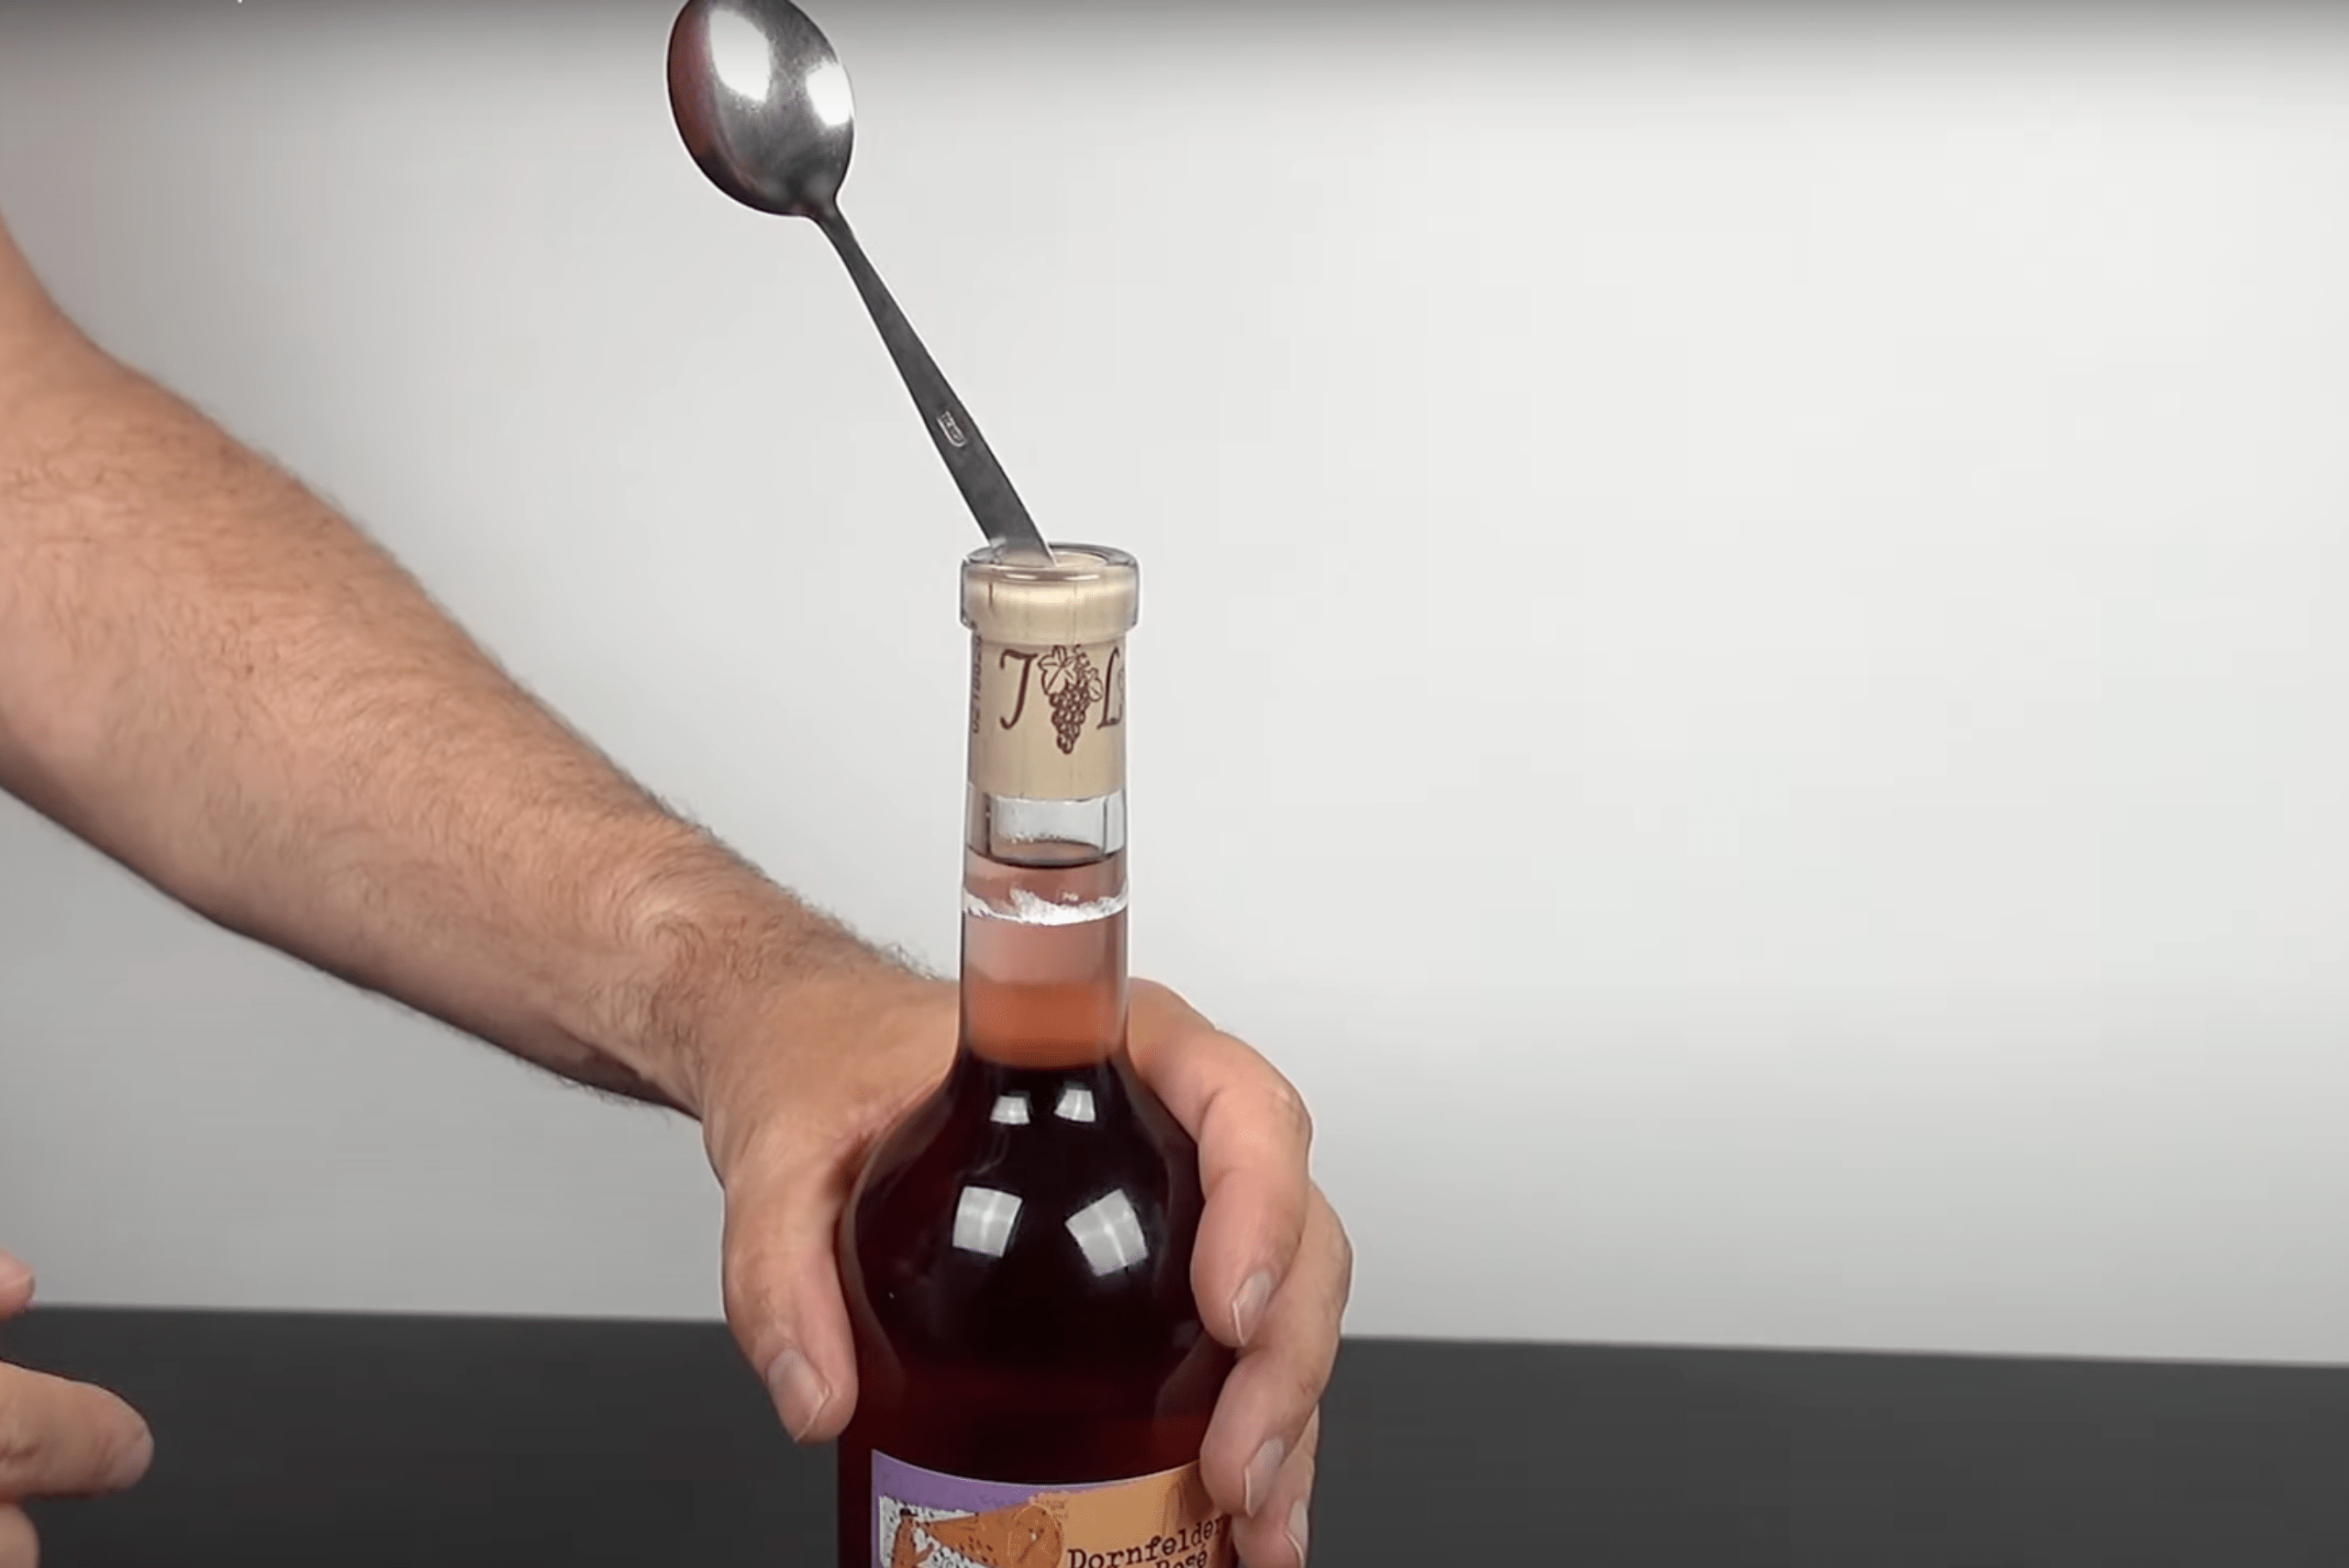 Person using spoon to open wine bottle.